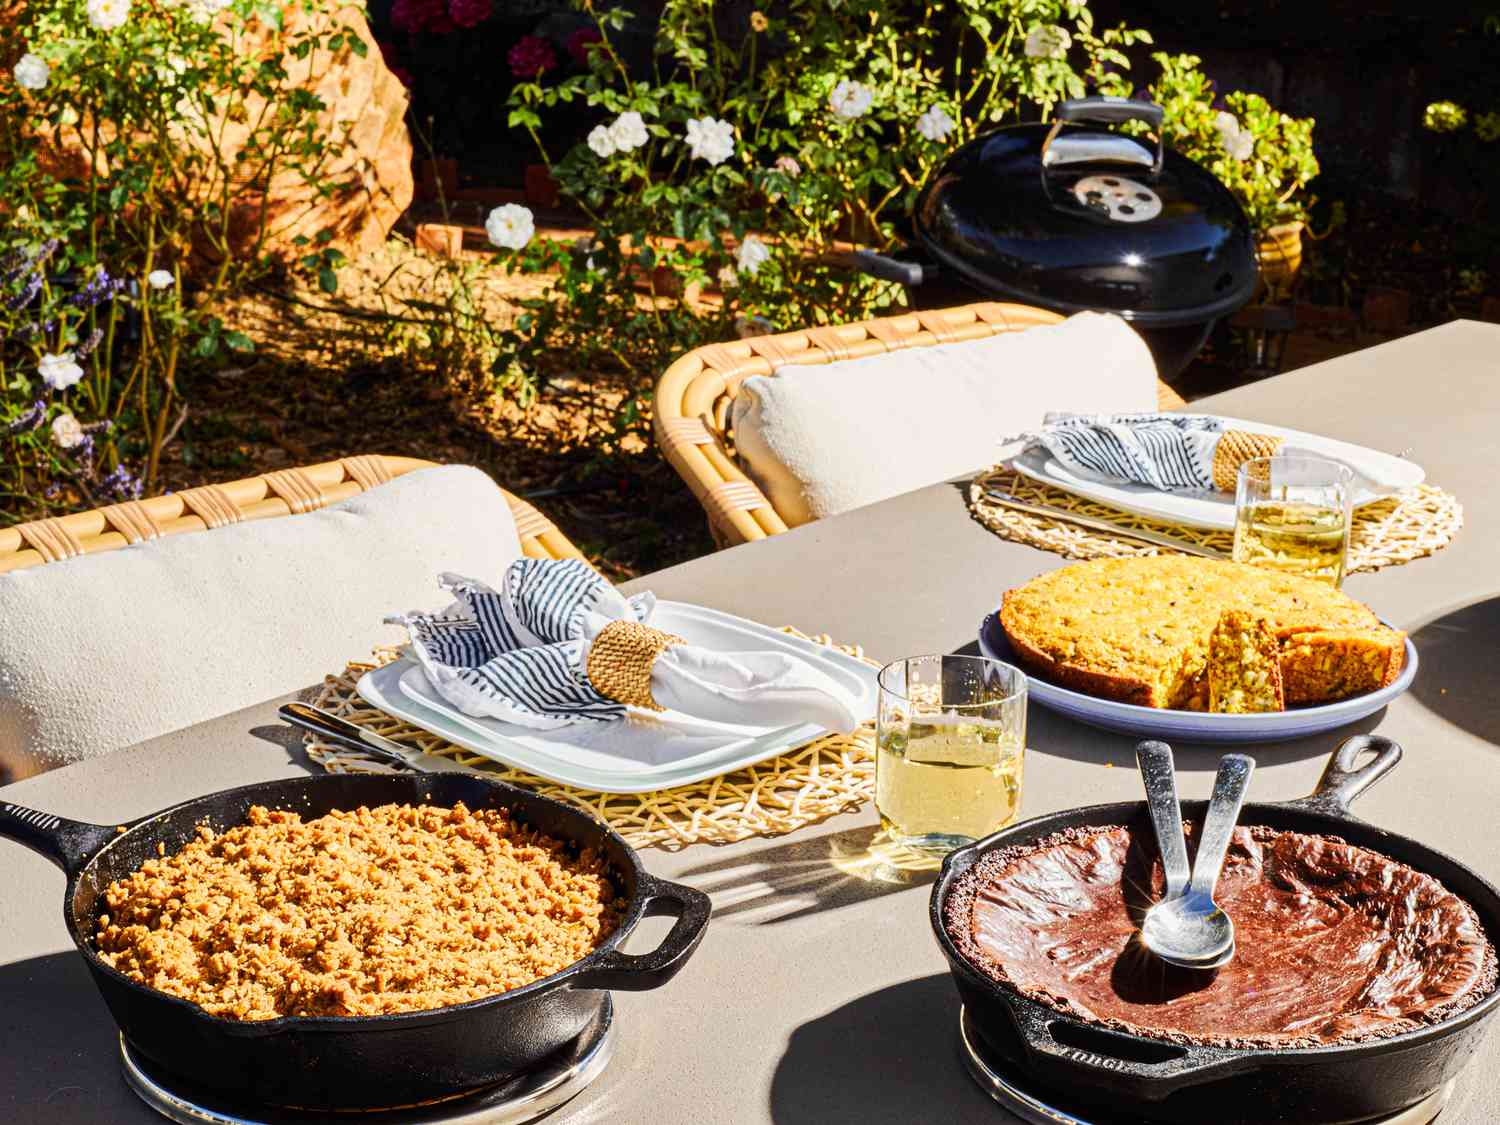 Tablescape view of dishes baked on grill